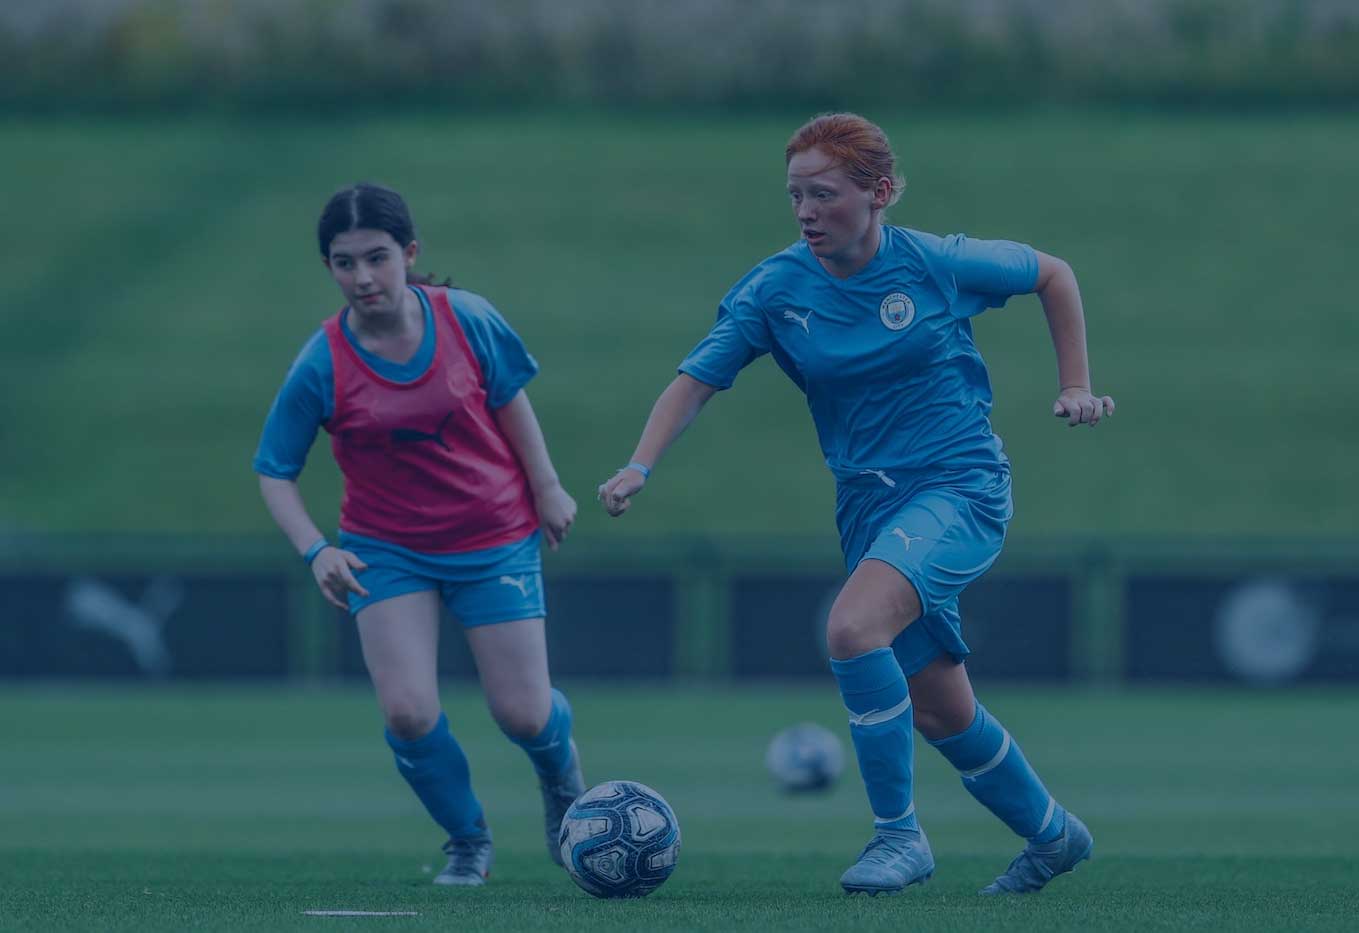 Two girls on the City Football Performance Program running towards a football. They are both wearing a blue football kit and one girl is wearing a red bib.